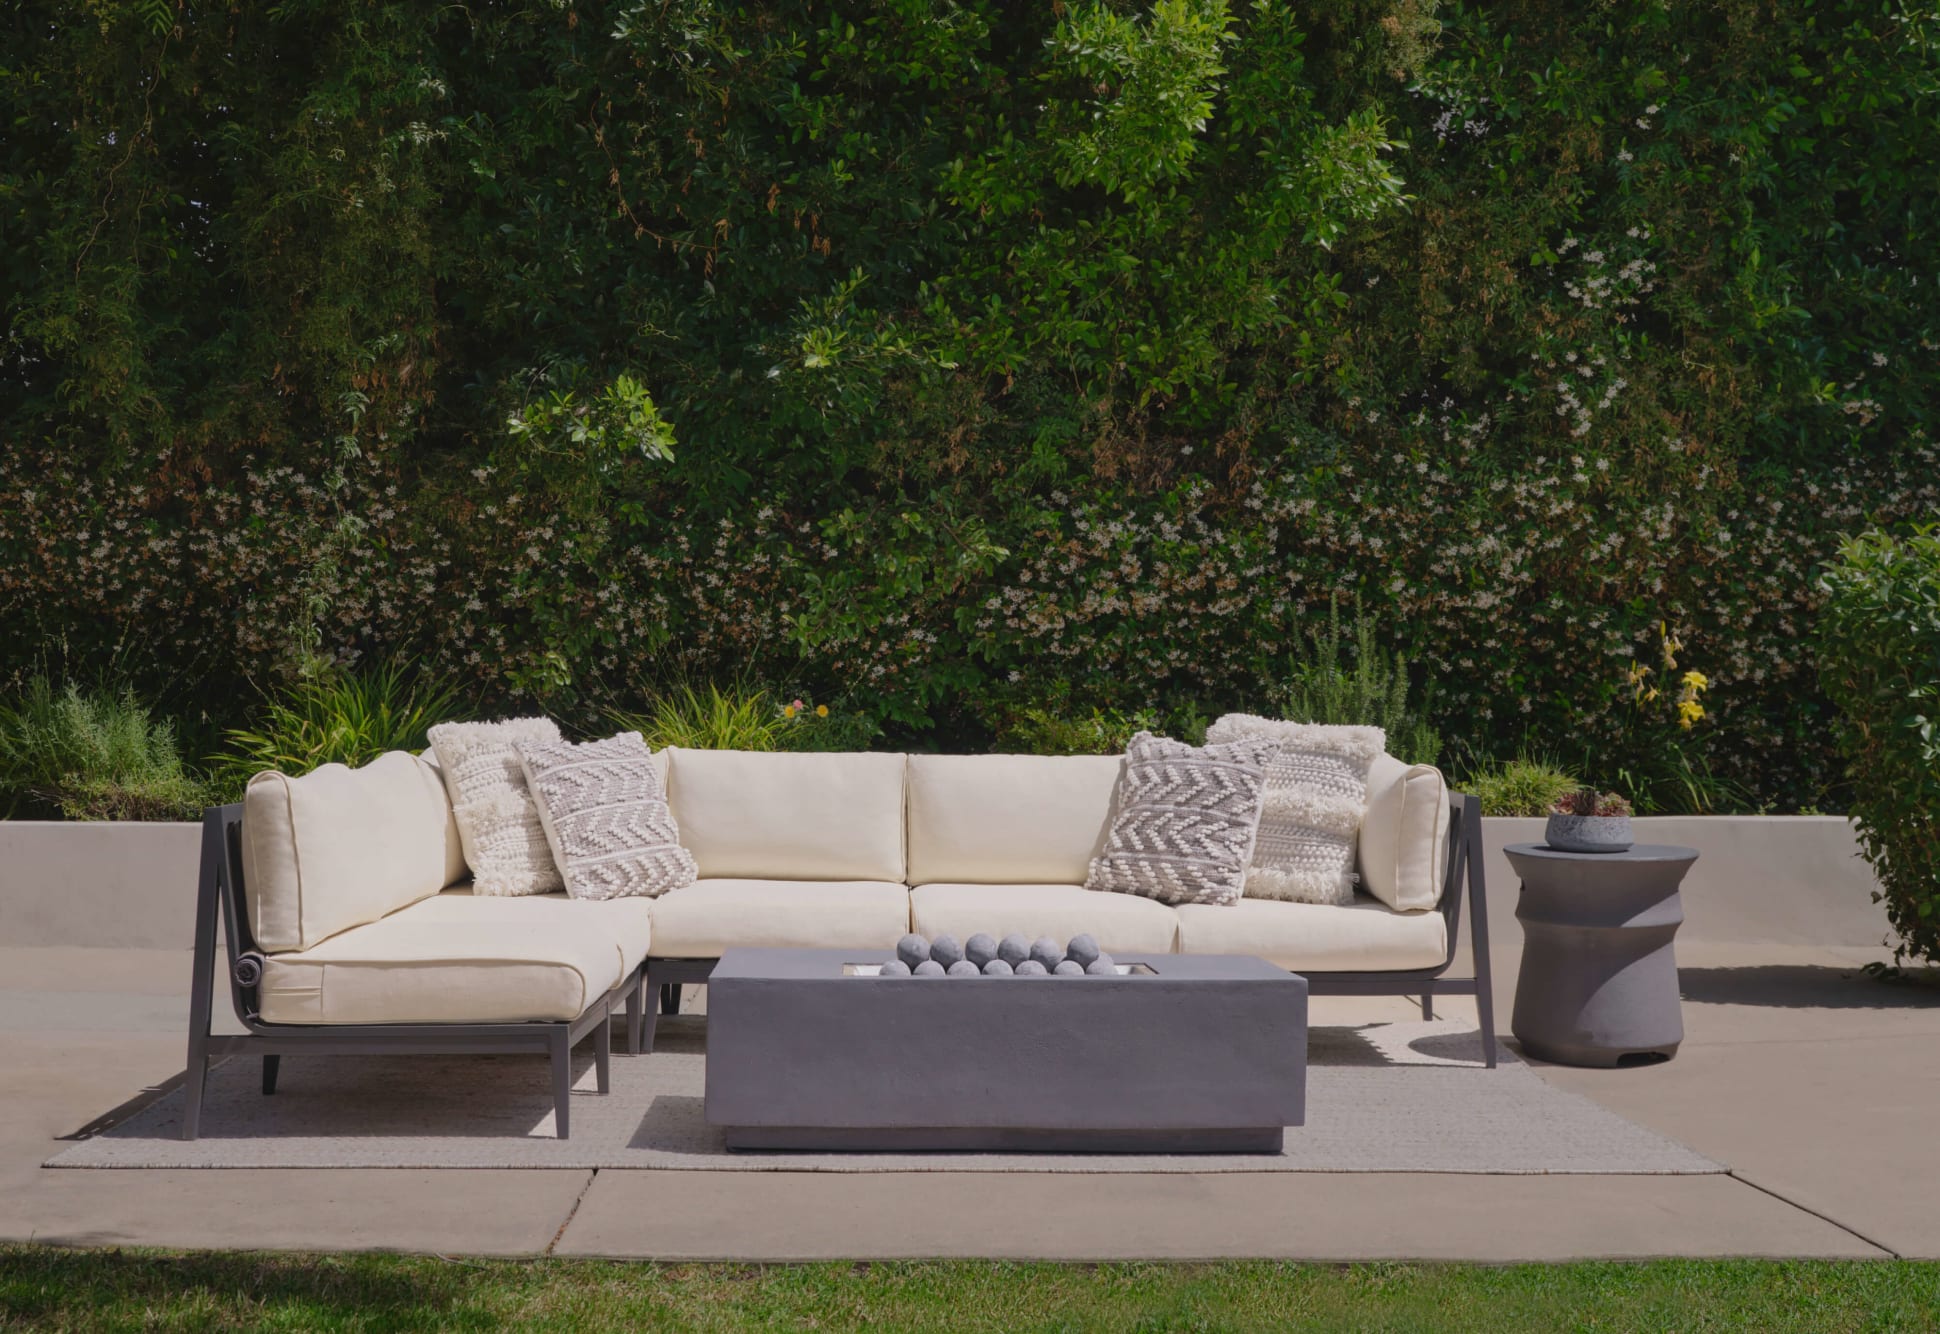 Live Outer 69" Charcoal Aluminum Outdoor Loveseat With Palisades Cream Cushion